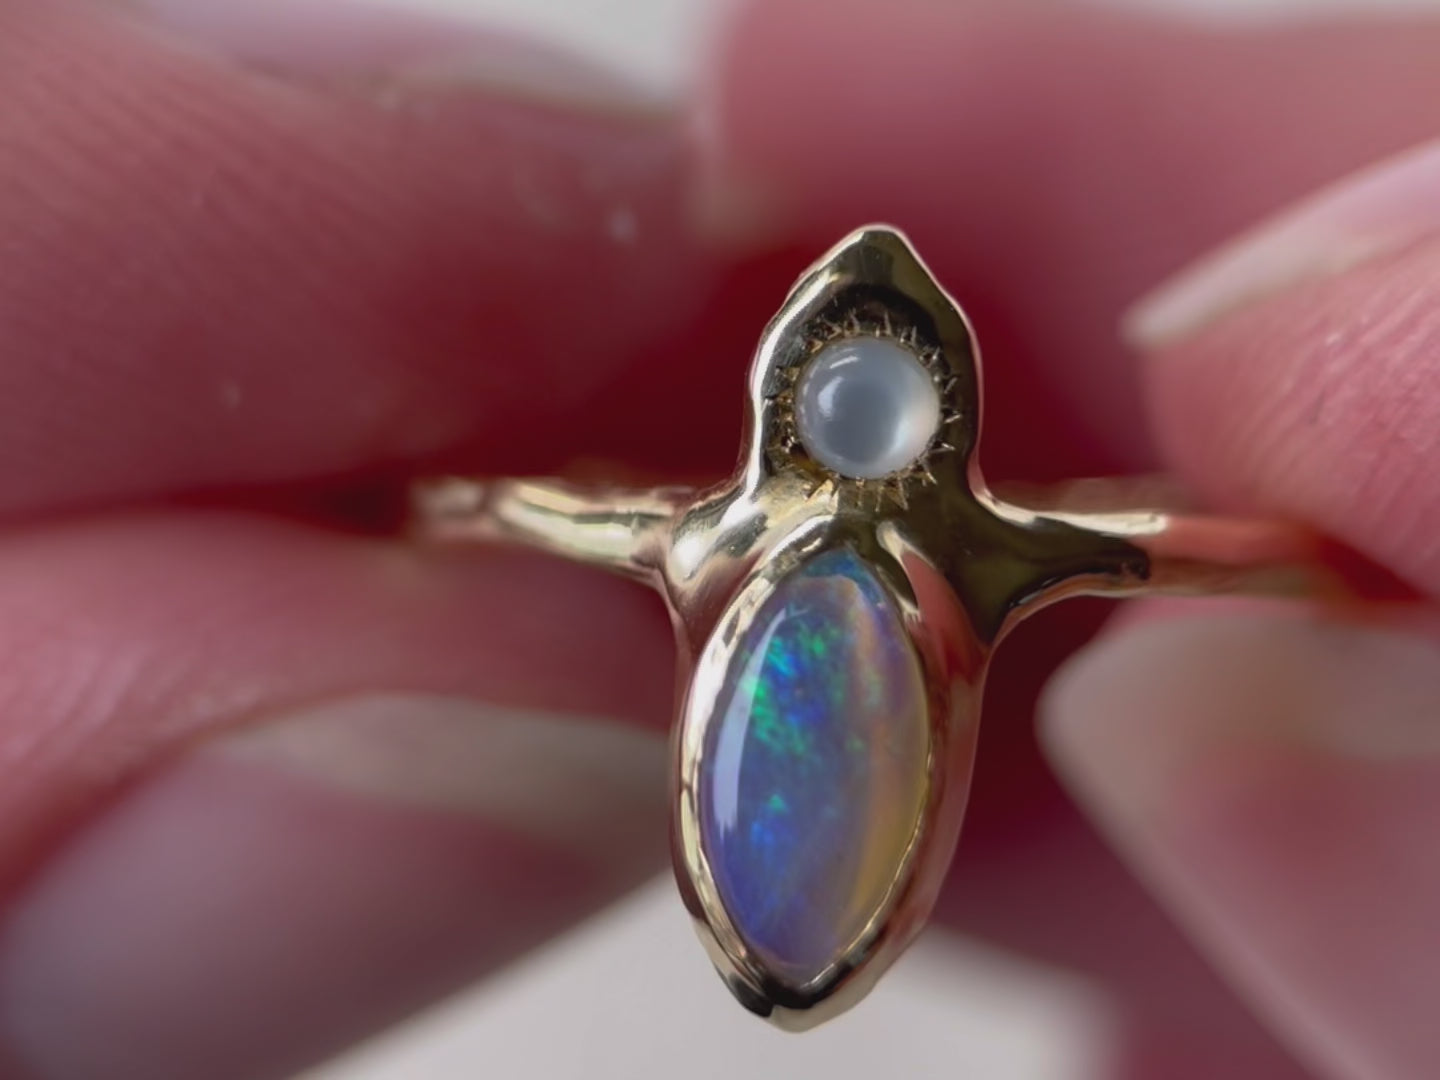 A close up video of the 'Tidal Treasure' ring design featuring a vertically-set marquise-cut opal at its center, with a round mother of pearl cabochon positioned above it. Delicate ticks radiate from the opal, resembling a mesmerizing starburst.